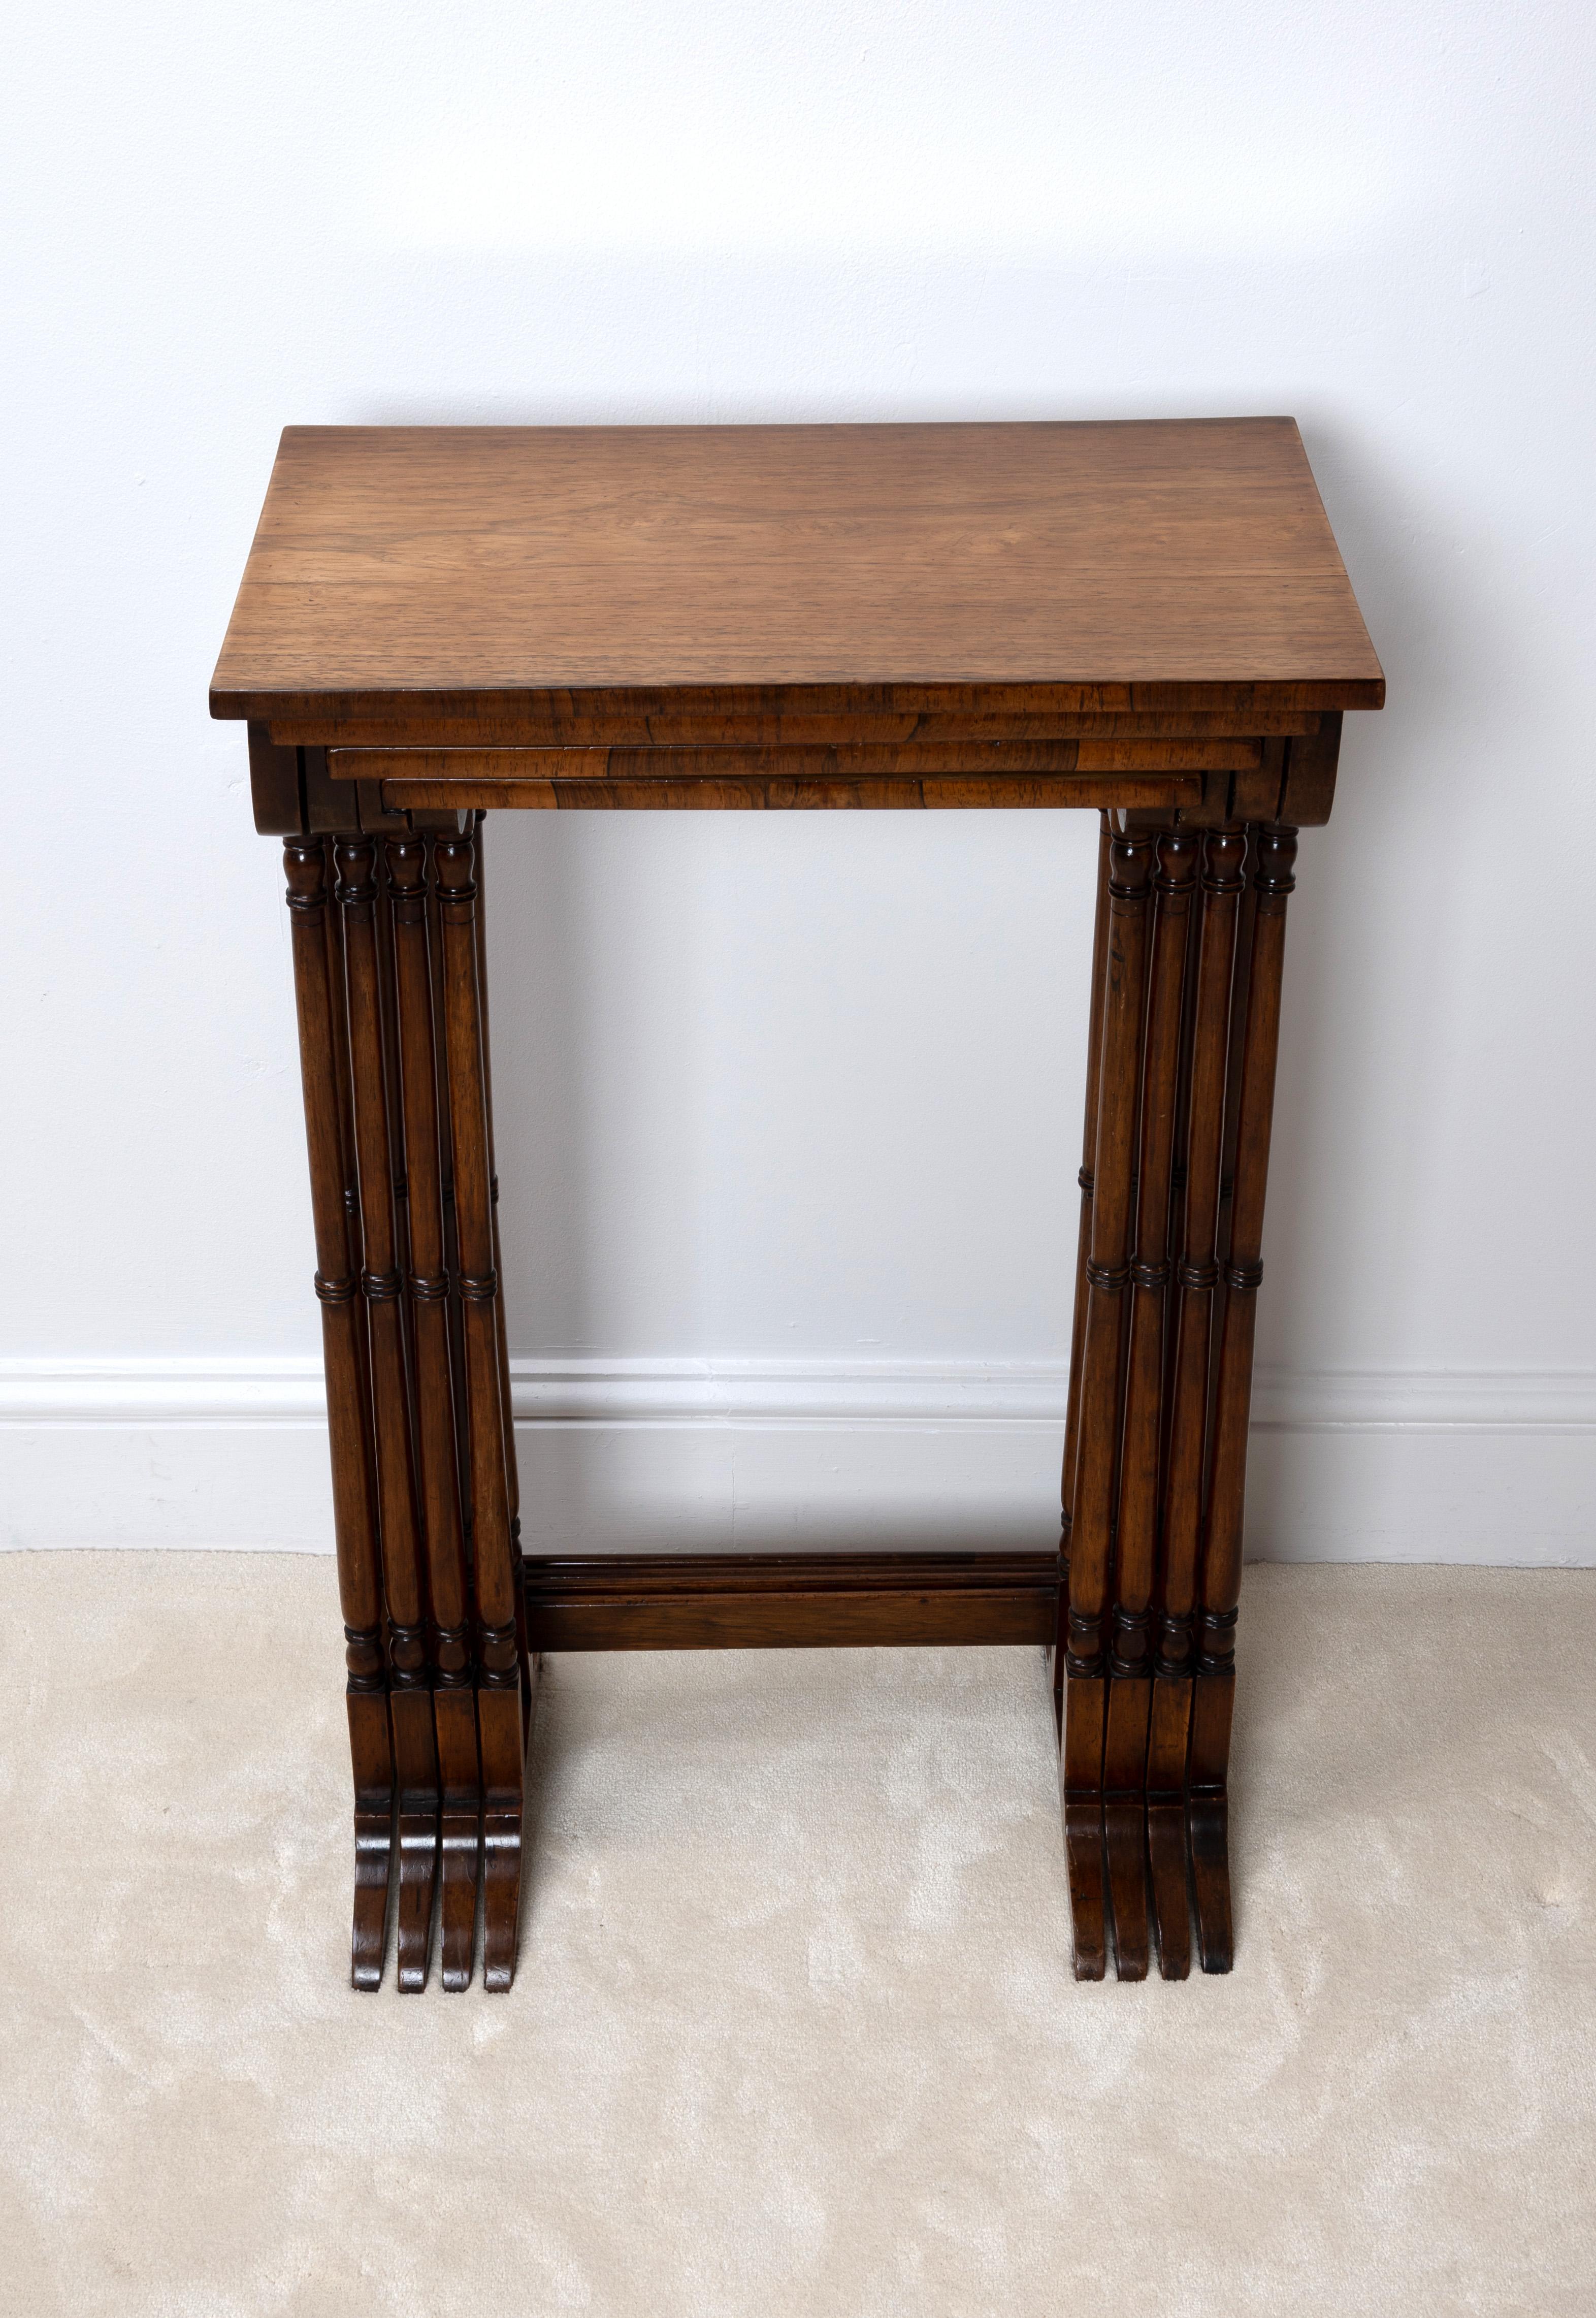 Antique English Regency Revival Rosewood Quartetto Of Nesting Table C.1820 For Sale 2